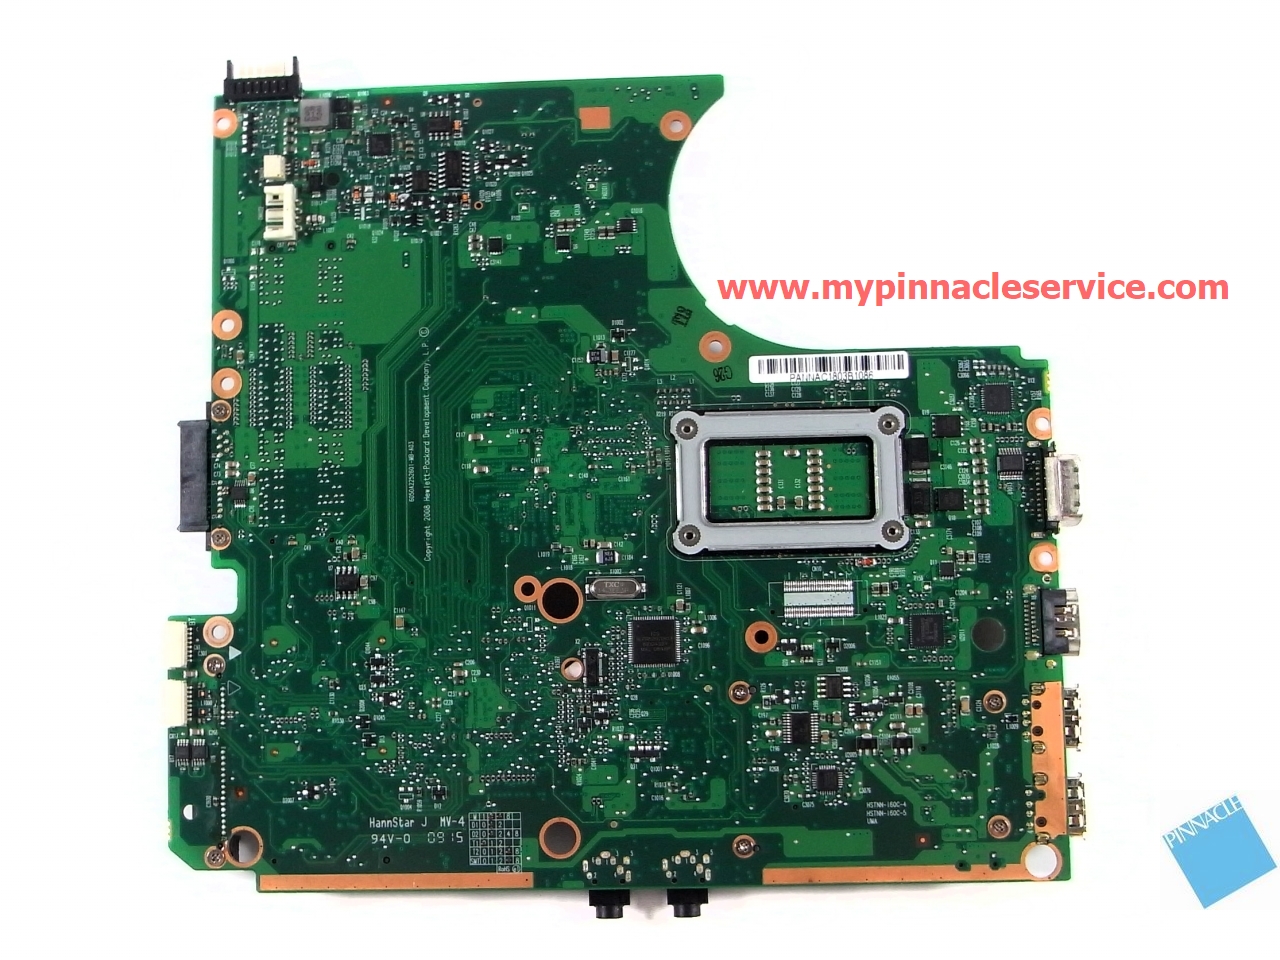 574510-001-motherboard-for-hp-probook-4410s-4411s-4510s-4311s-6050a2252601-rimg0043.jpg